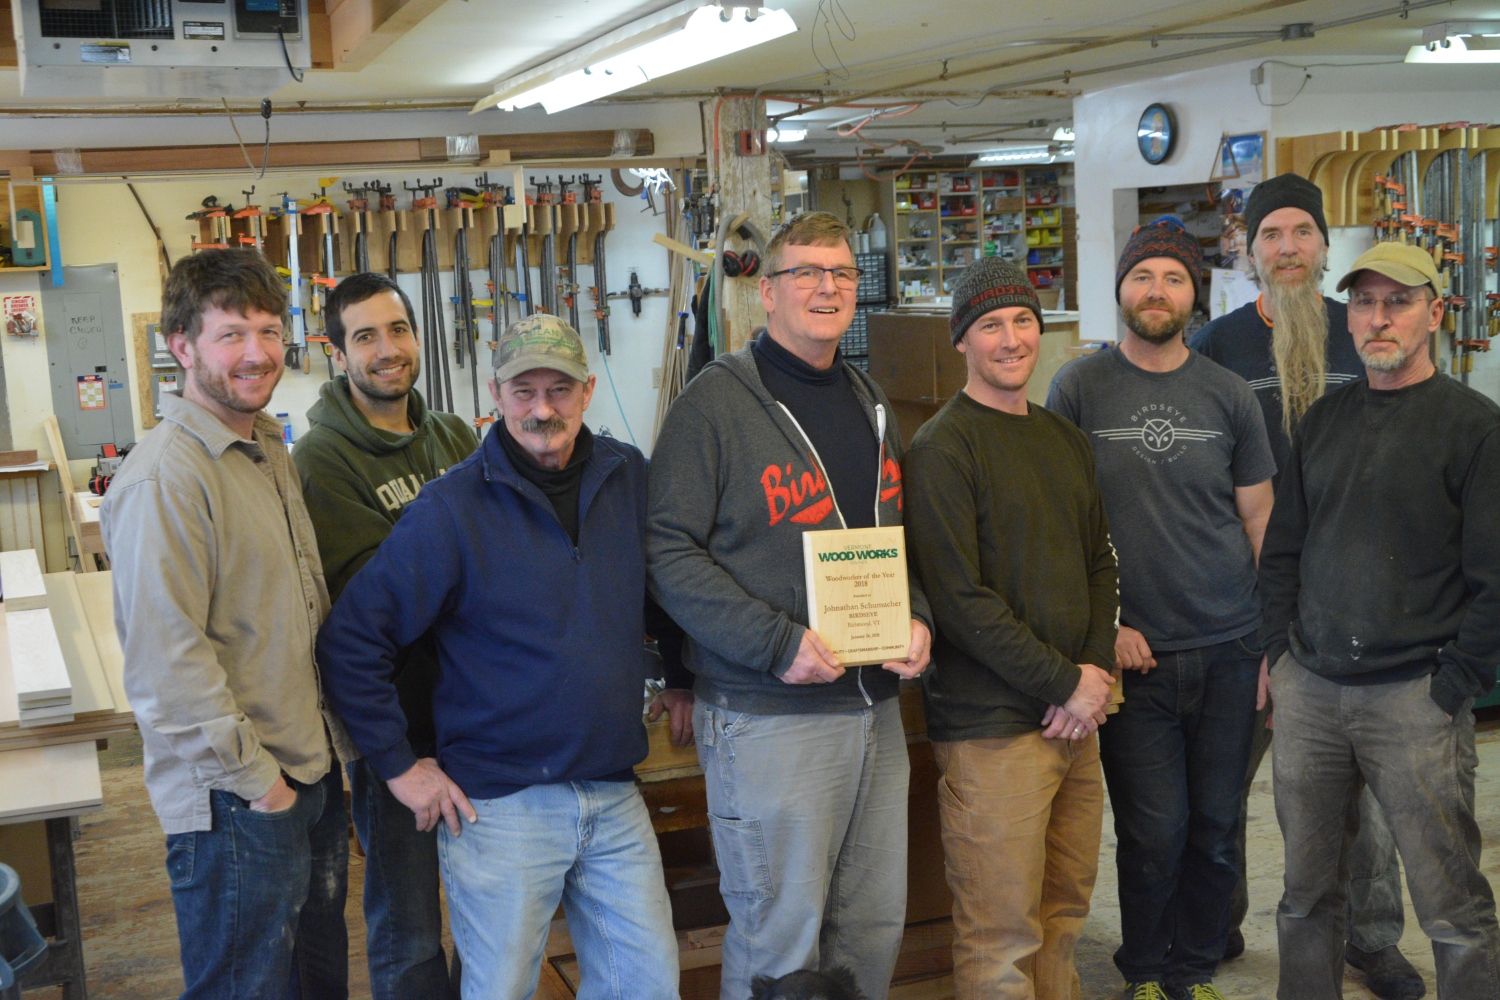 Birdseye woodshop awarded “2018 Woodworker of the Year”  by the Vermont Wood Works Council.